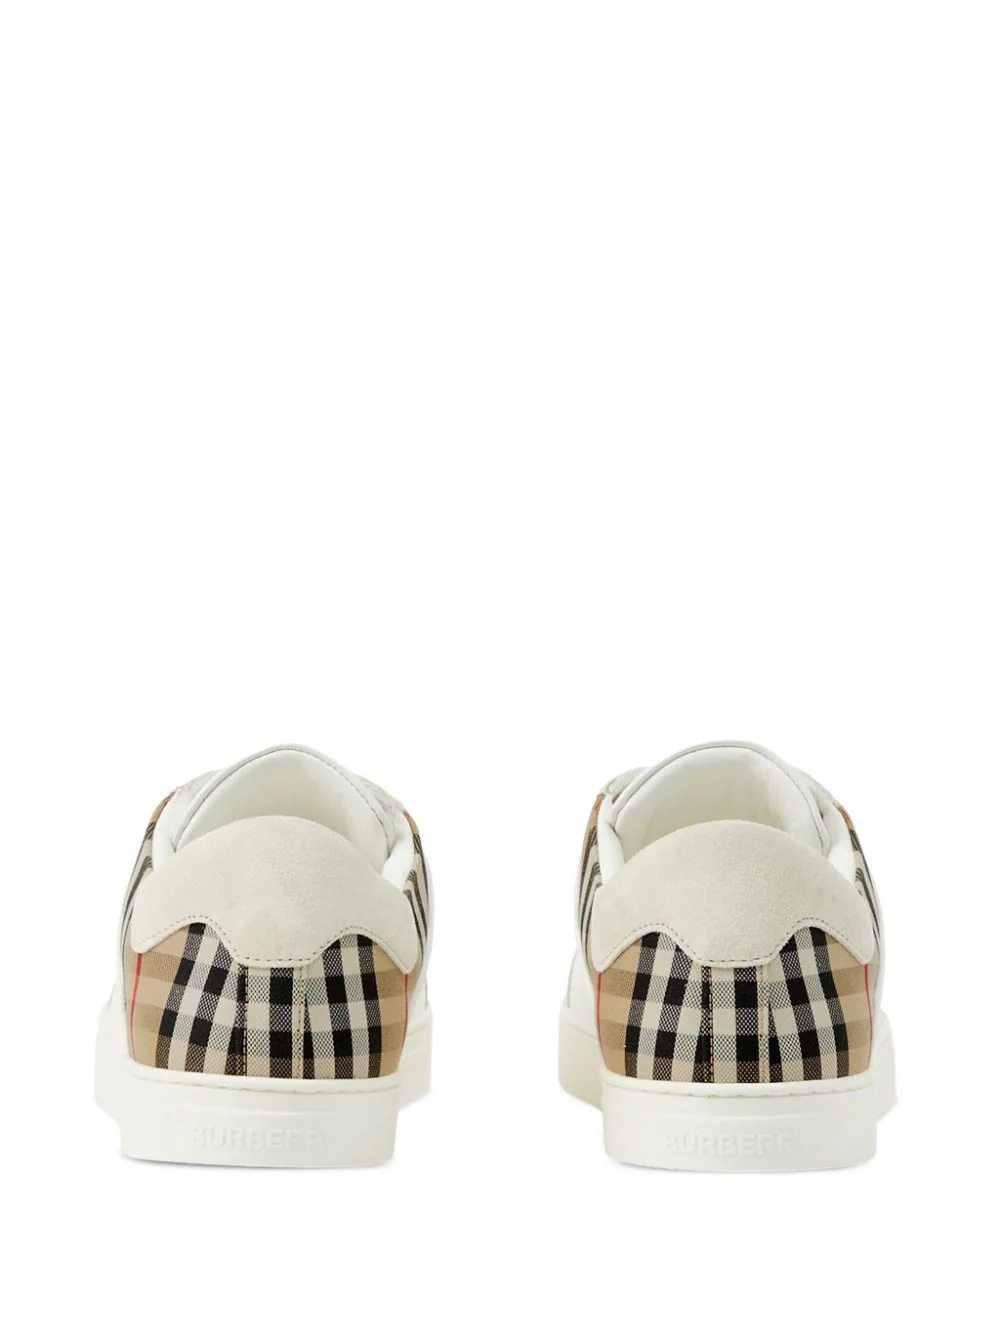 BURBERRY Men Vintage Check Panelled Sneakers - 3